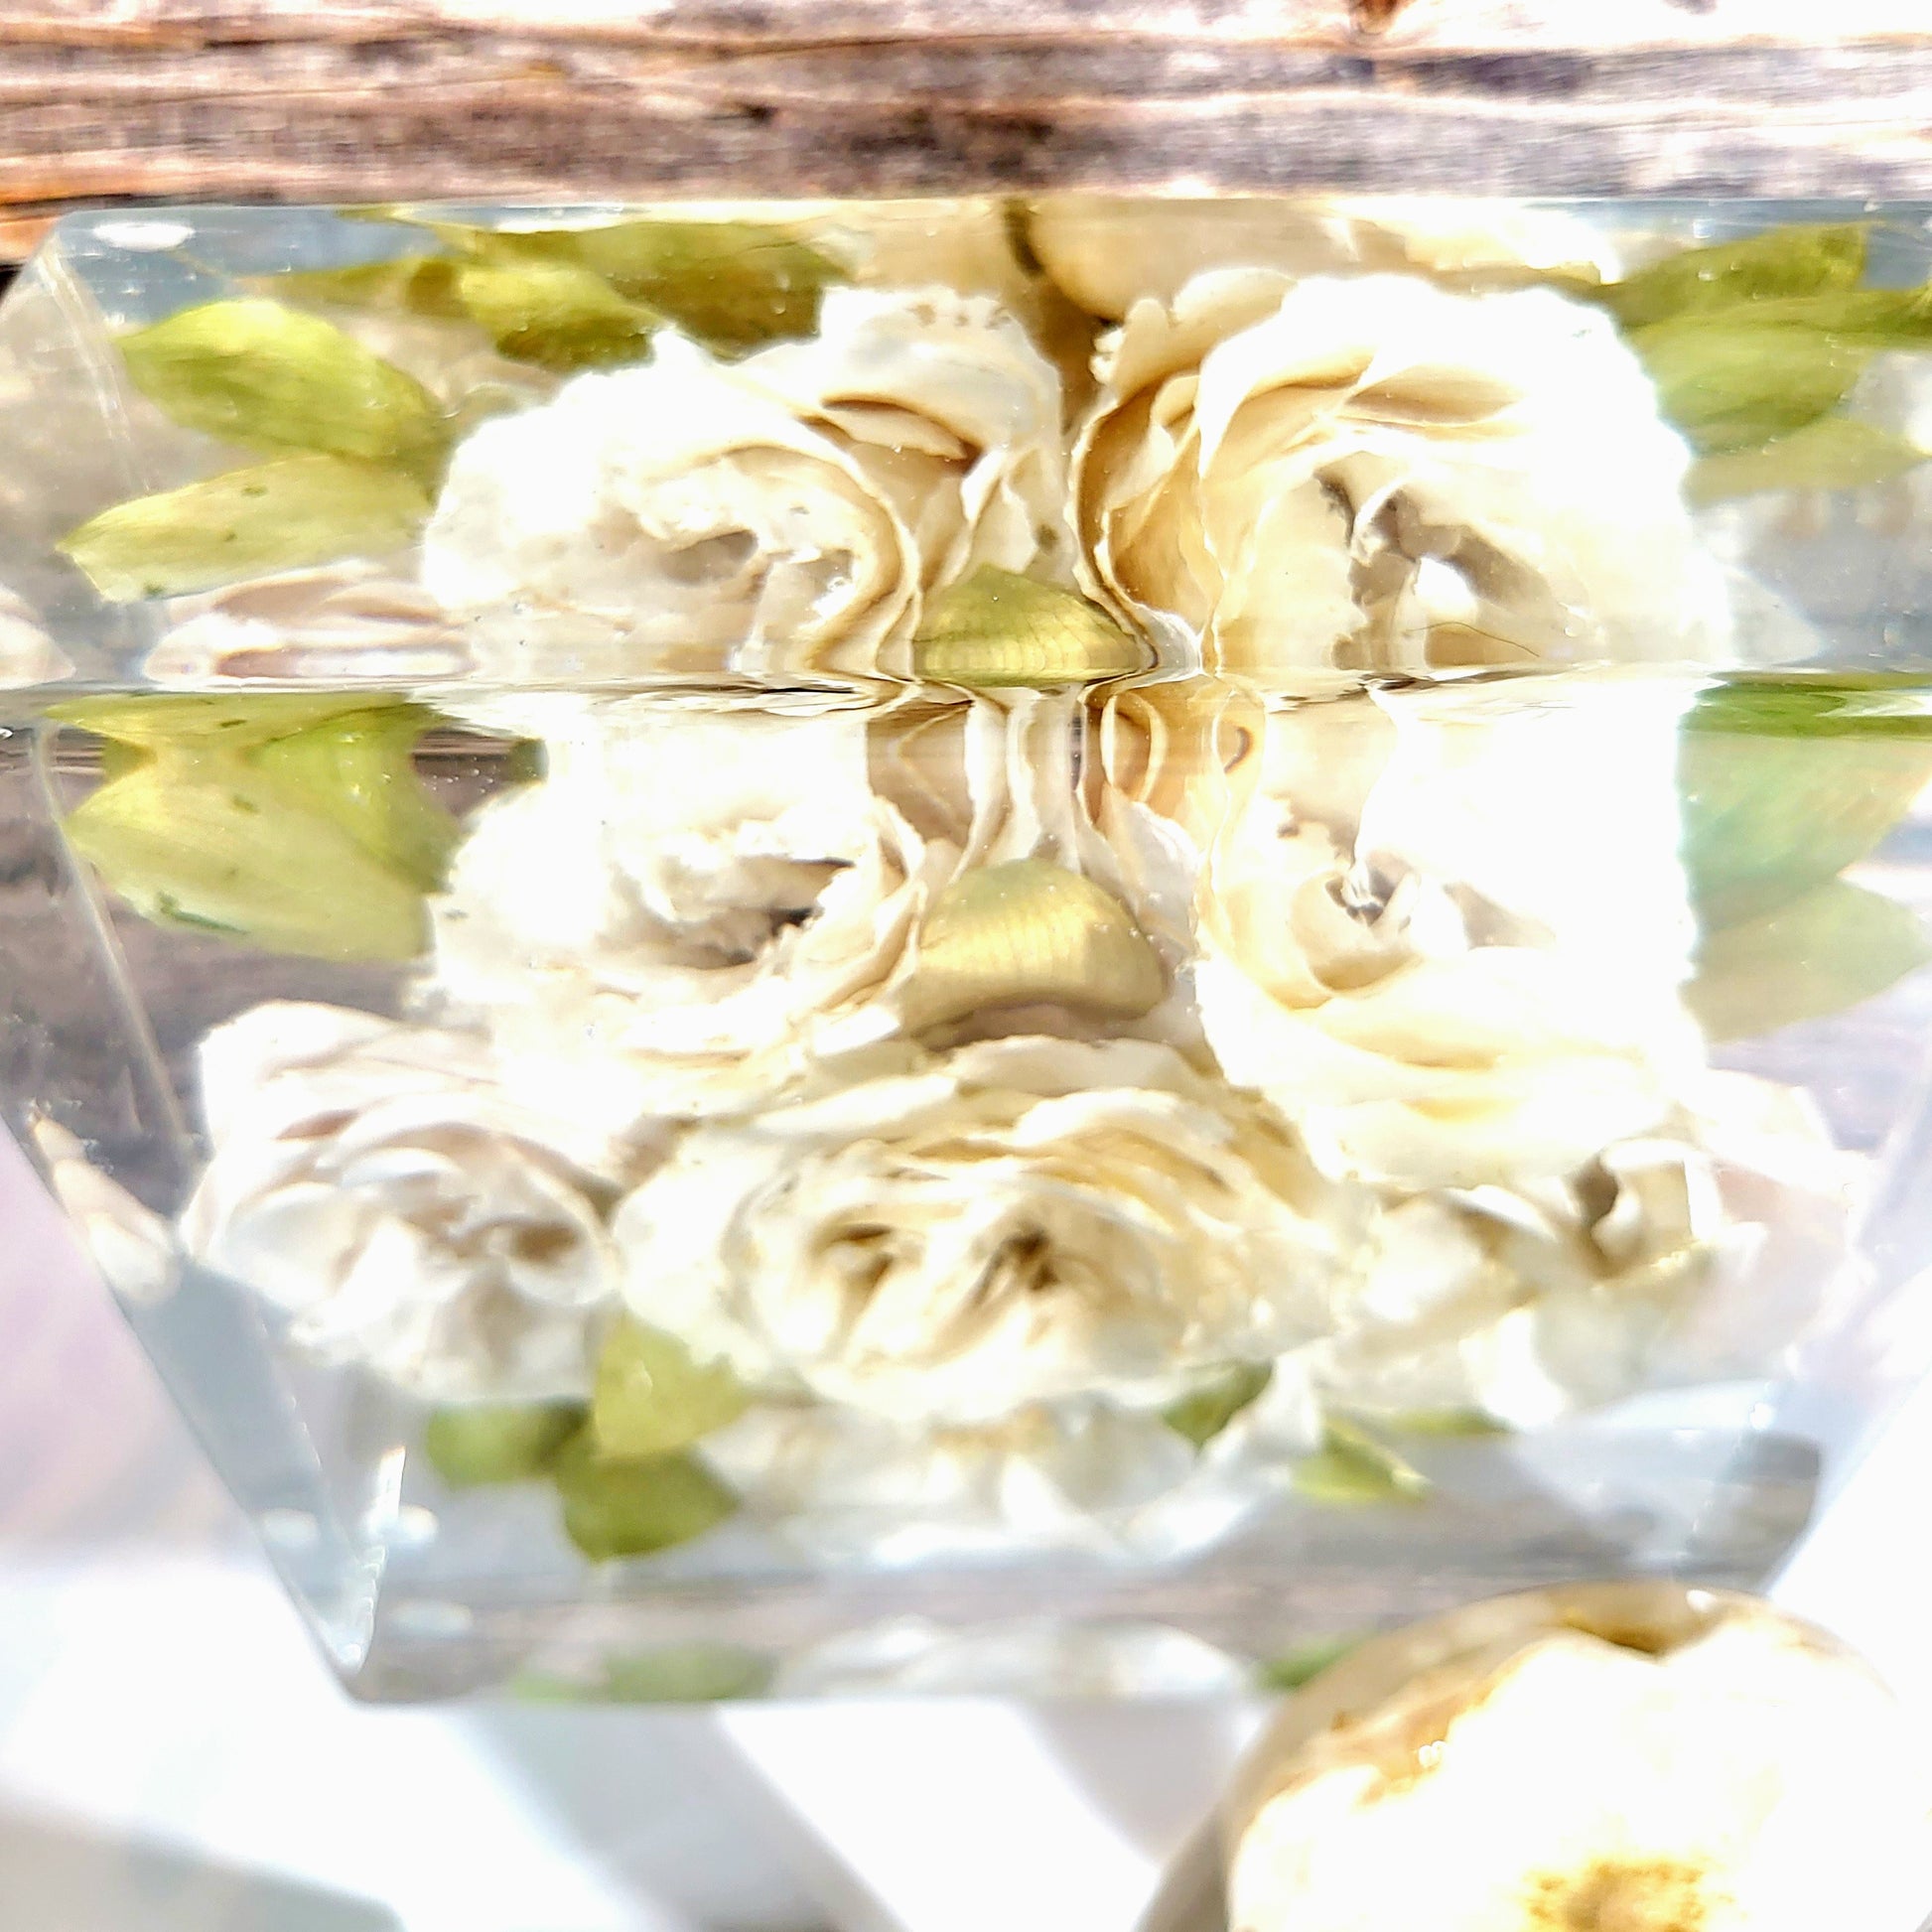 8"x 8" Square Luxury 3D Floral Resin Cube Wedding Bouquet Preservation Modern Fried Flowers Square Save Your Gift Keepsake - flofloflowery